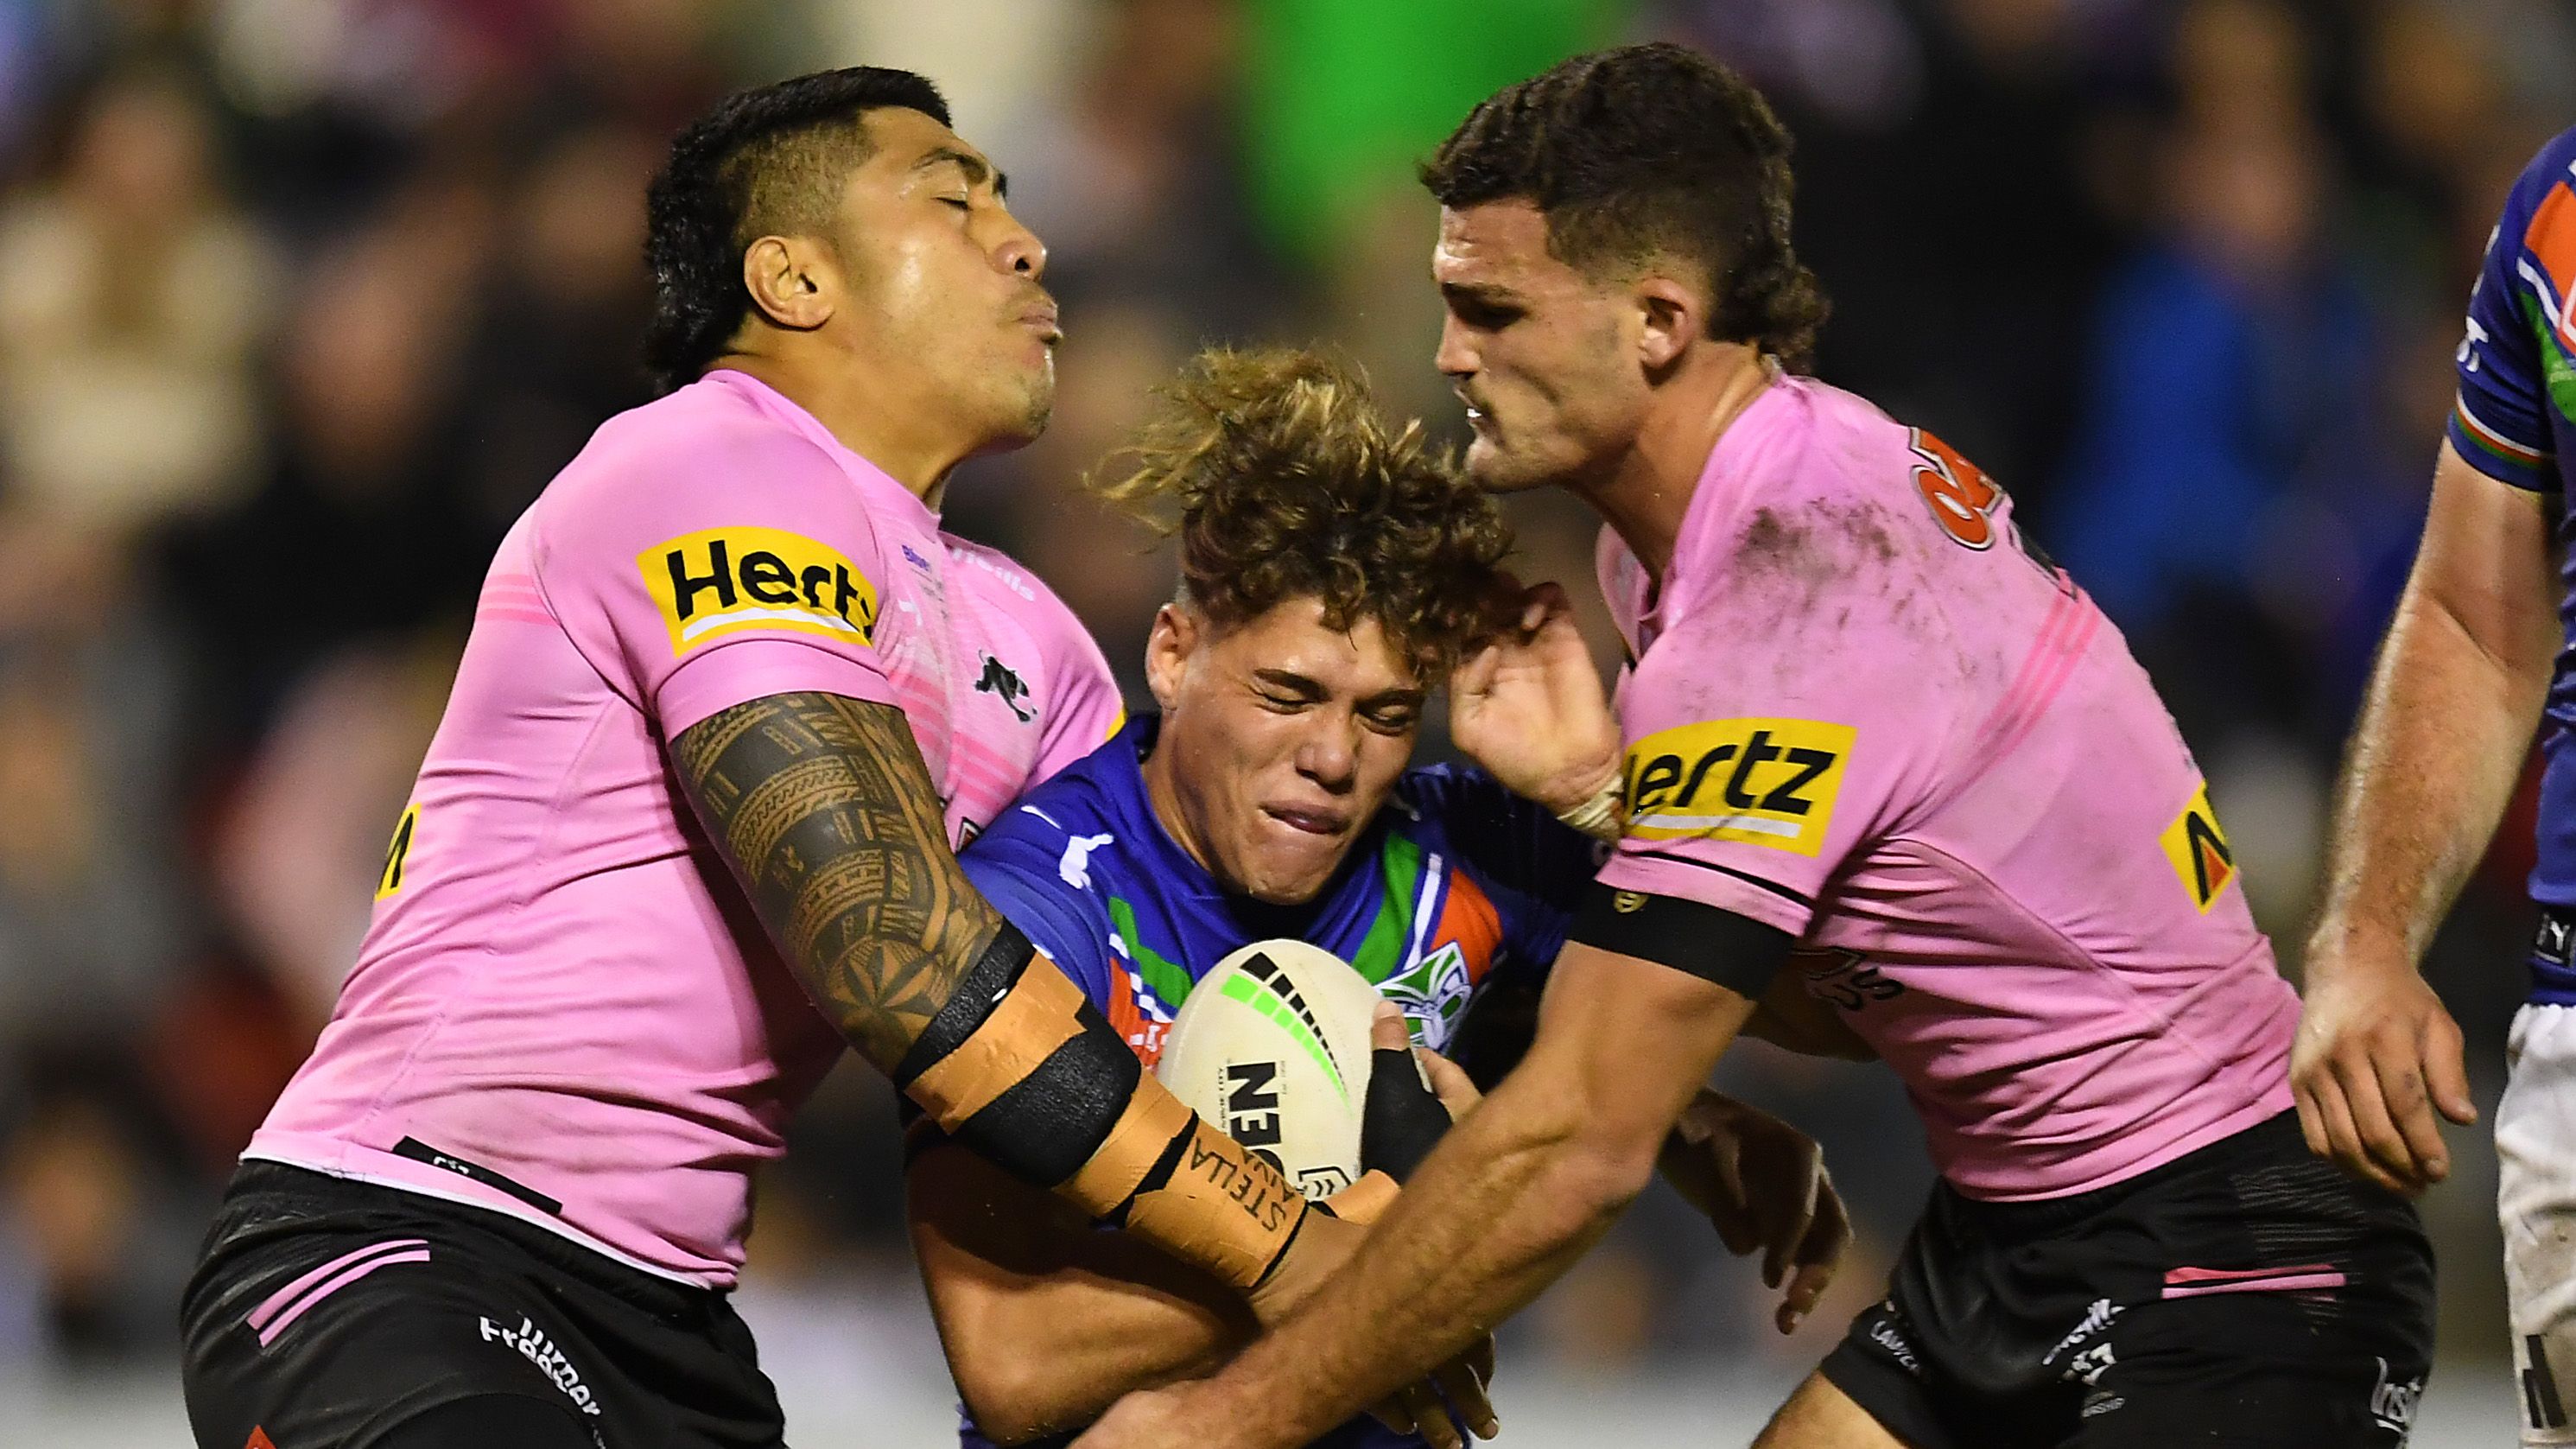 Reece Walsh of the Warriors is tackled during the round 15 NRL match between the New Zealand Warriors and the Penrith Panthers at Moreton Daily Stadium, on June 18, 2022, in Brisbane, Australia. (Photo by Albert Perez/Getty Images)